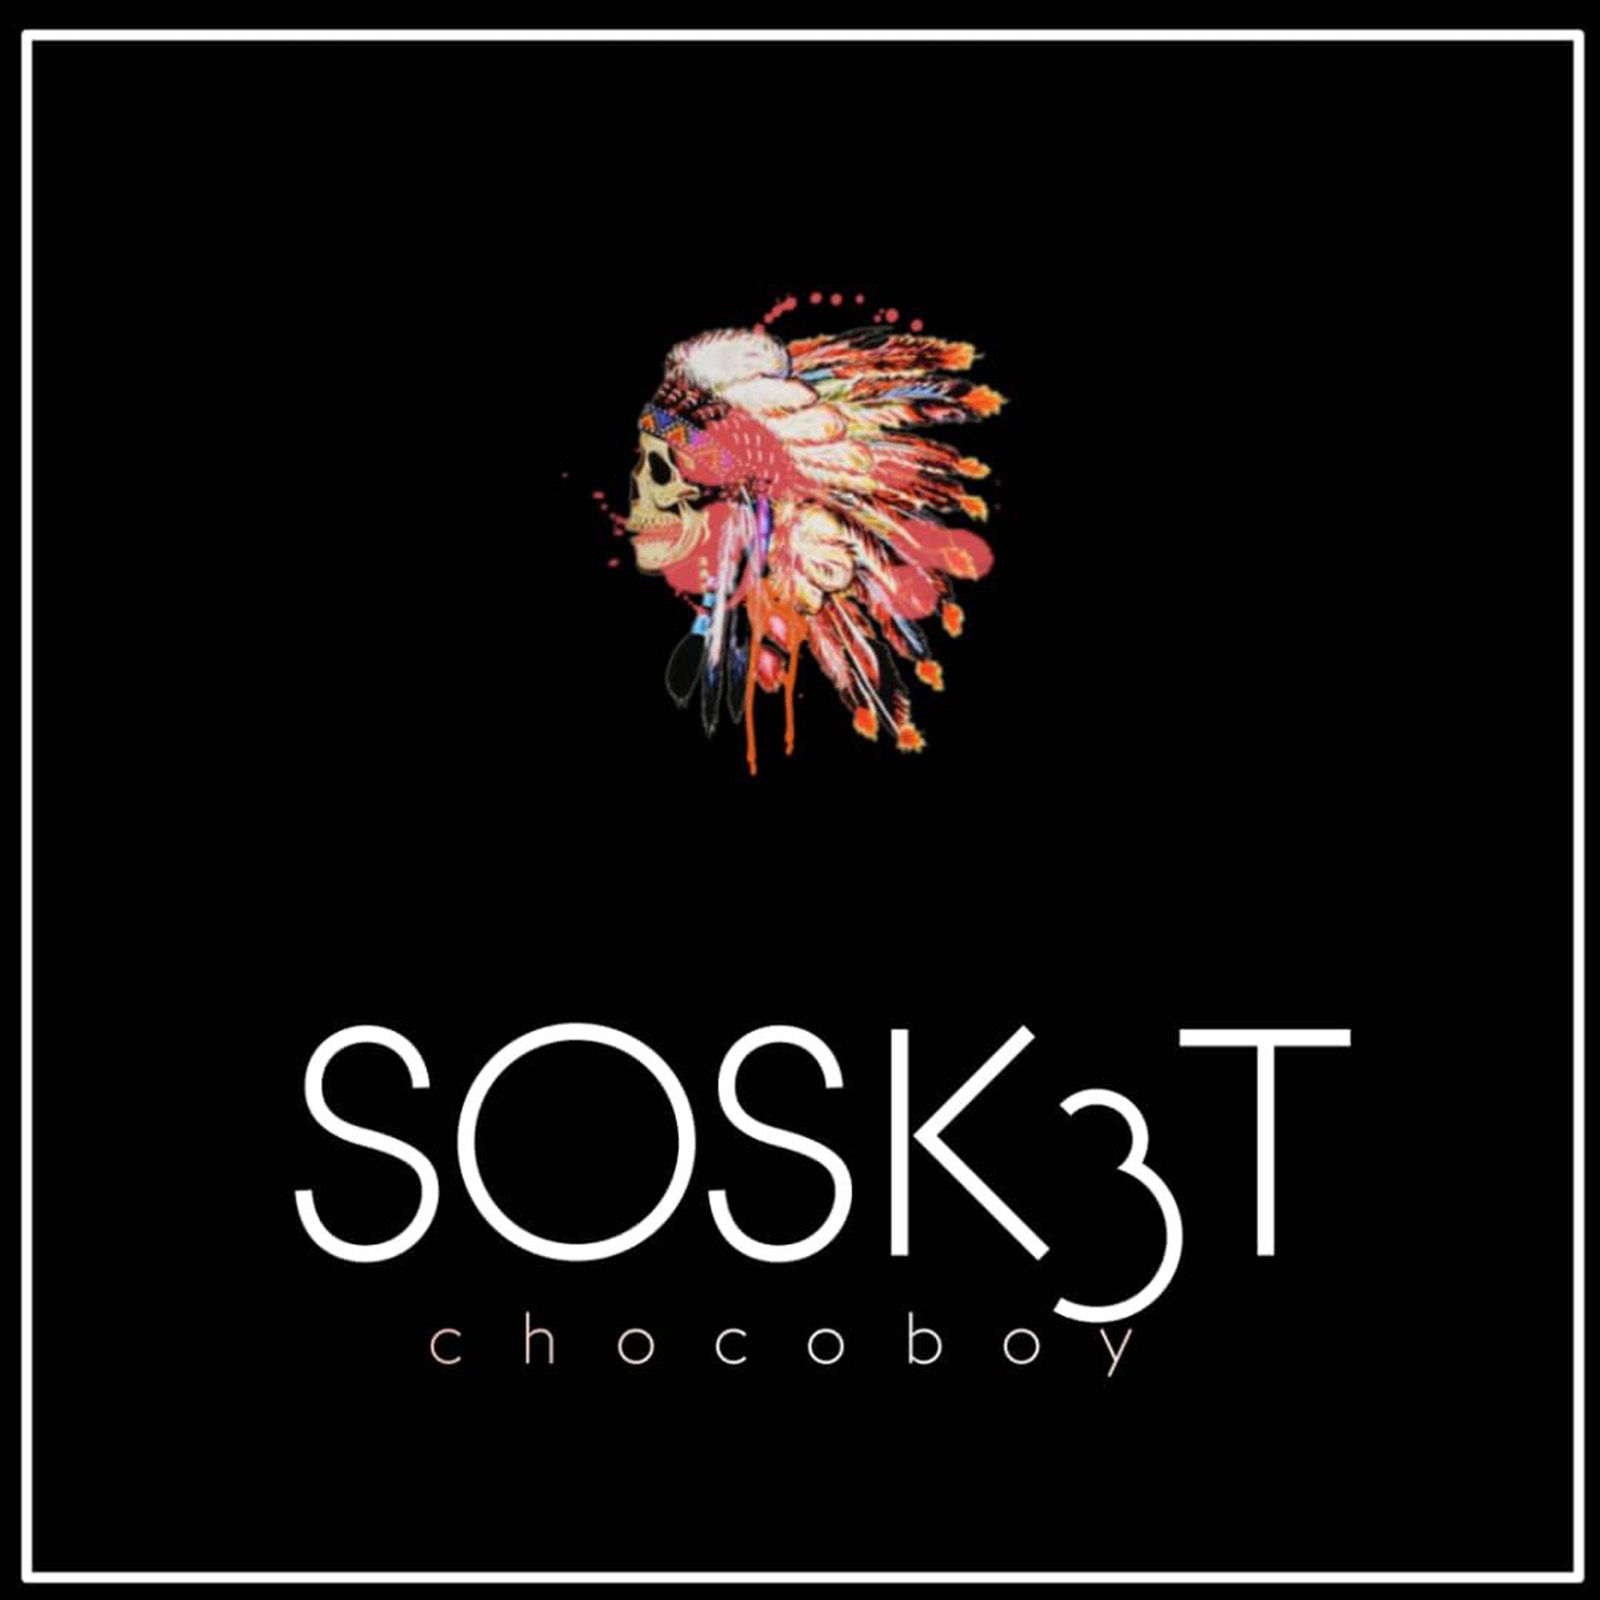 Sosk3t by Chocoboy